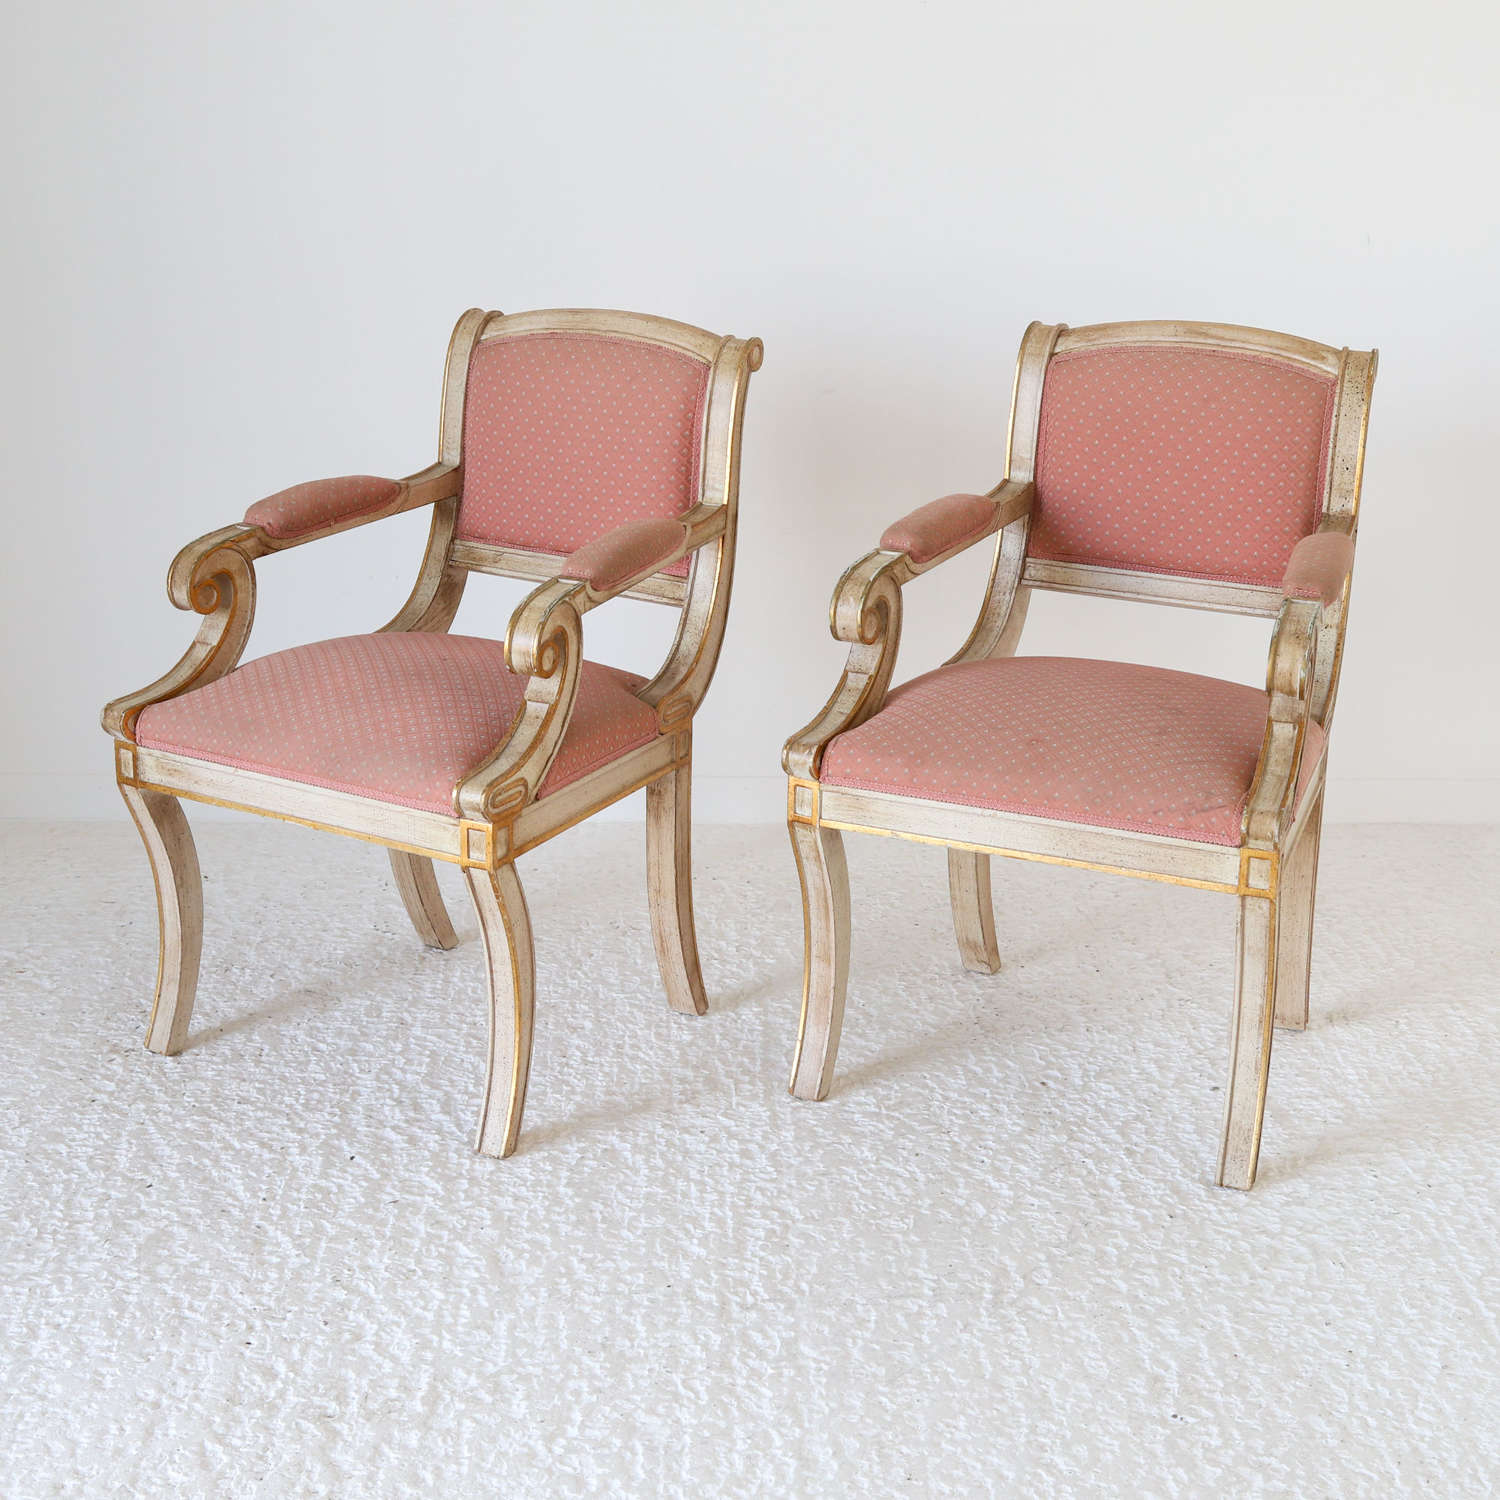 Pair of French Empire Style Armchairs c 1920 Ivory Colour Paint Finish